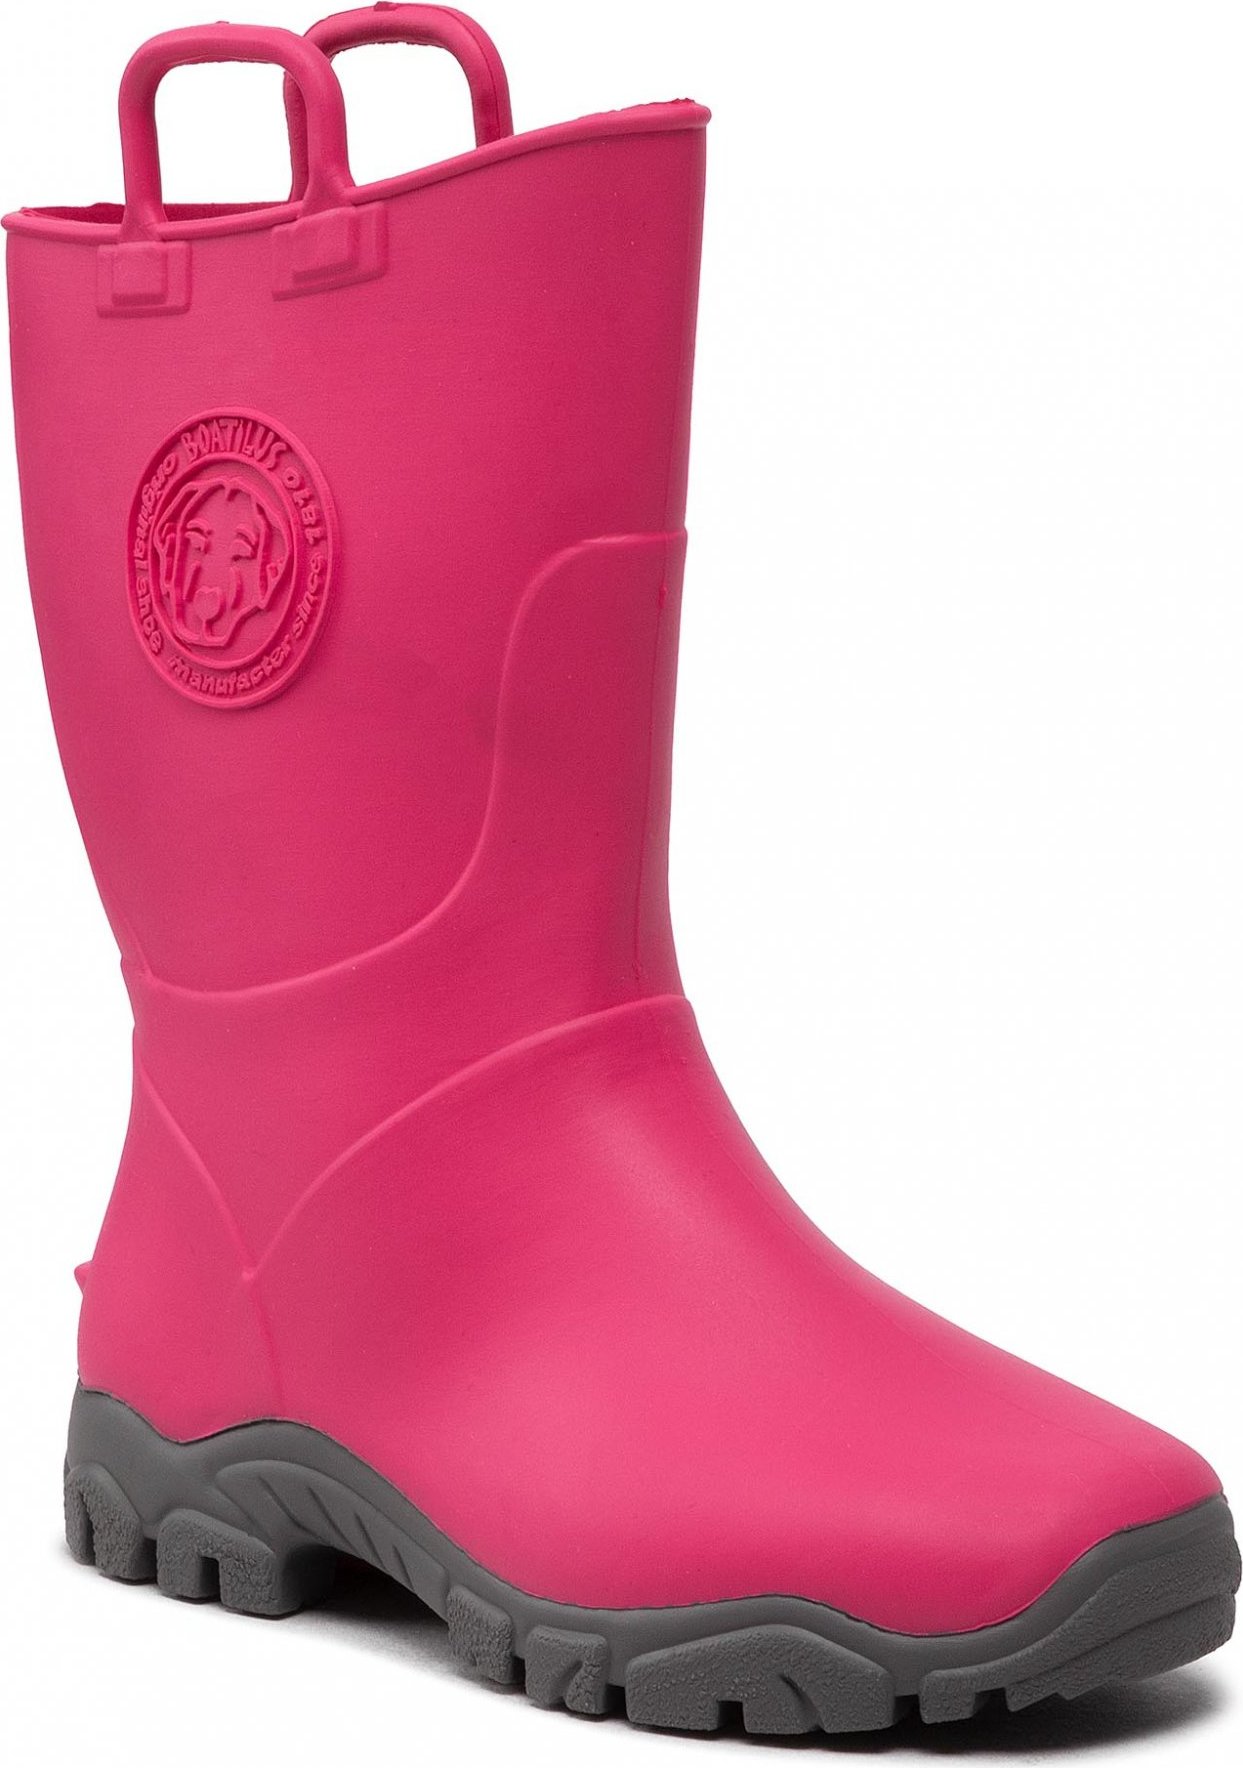 Boatilus Ducky Smelly Welly VAR.M12